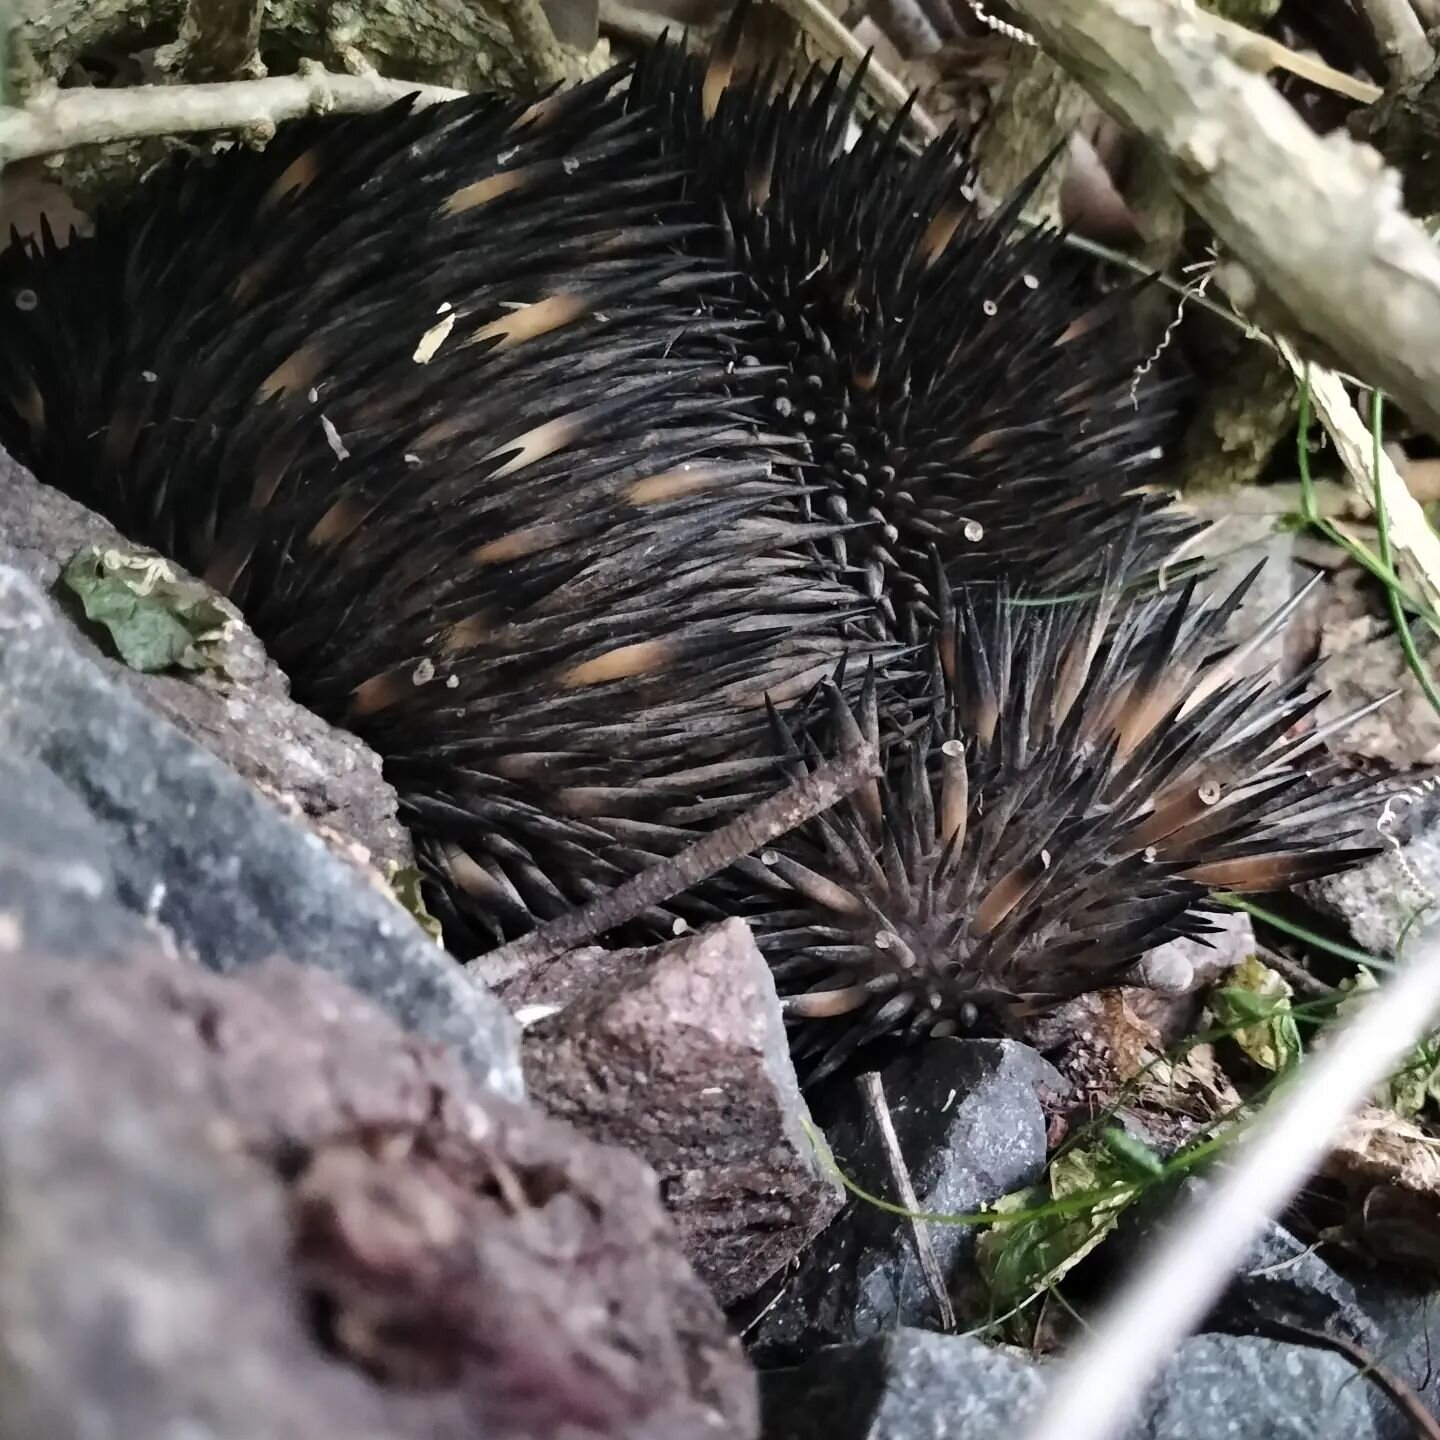 Heard some rustling in the bush and figured I'd found a hens nesting hidey hole ... Nope, this is a spikey not chicken 😂 although being a monotremes echidnas do lay eggs! Just direct into their pouches. Not sure why this one is intent on burrowing d